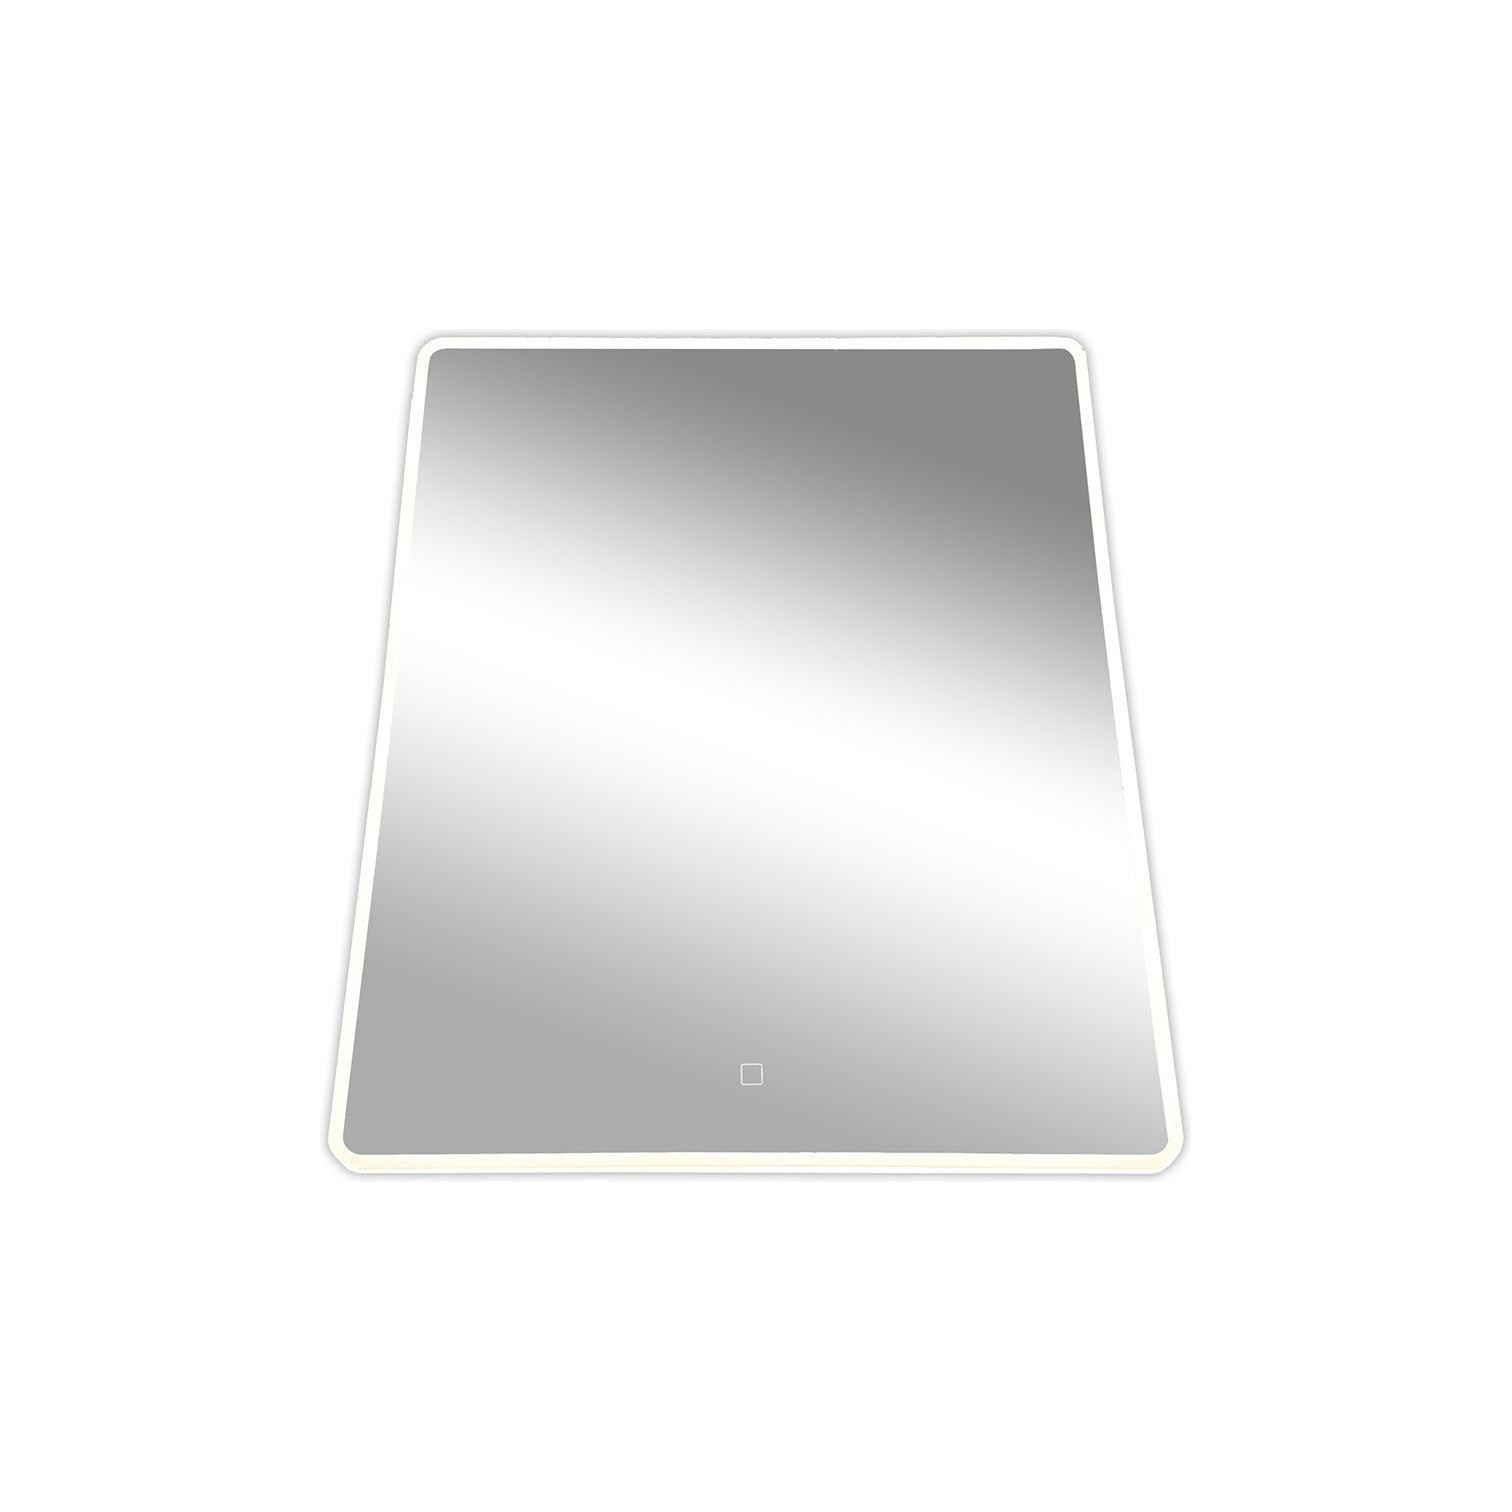 Reflections Rectangle LED Mirror